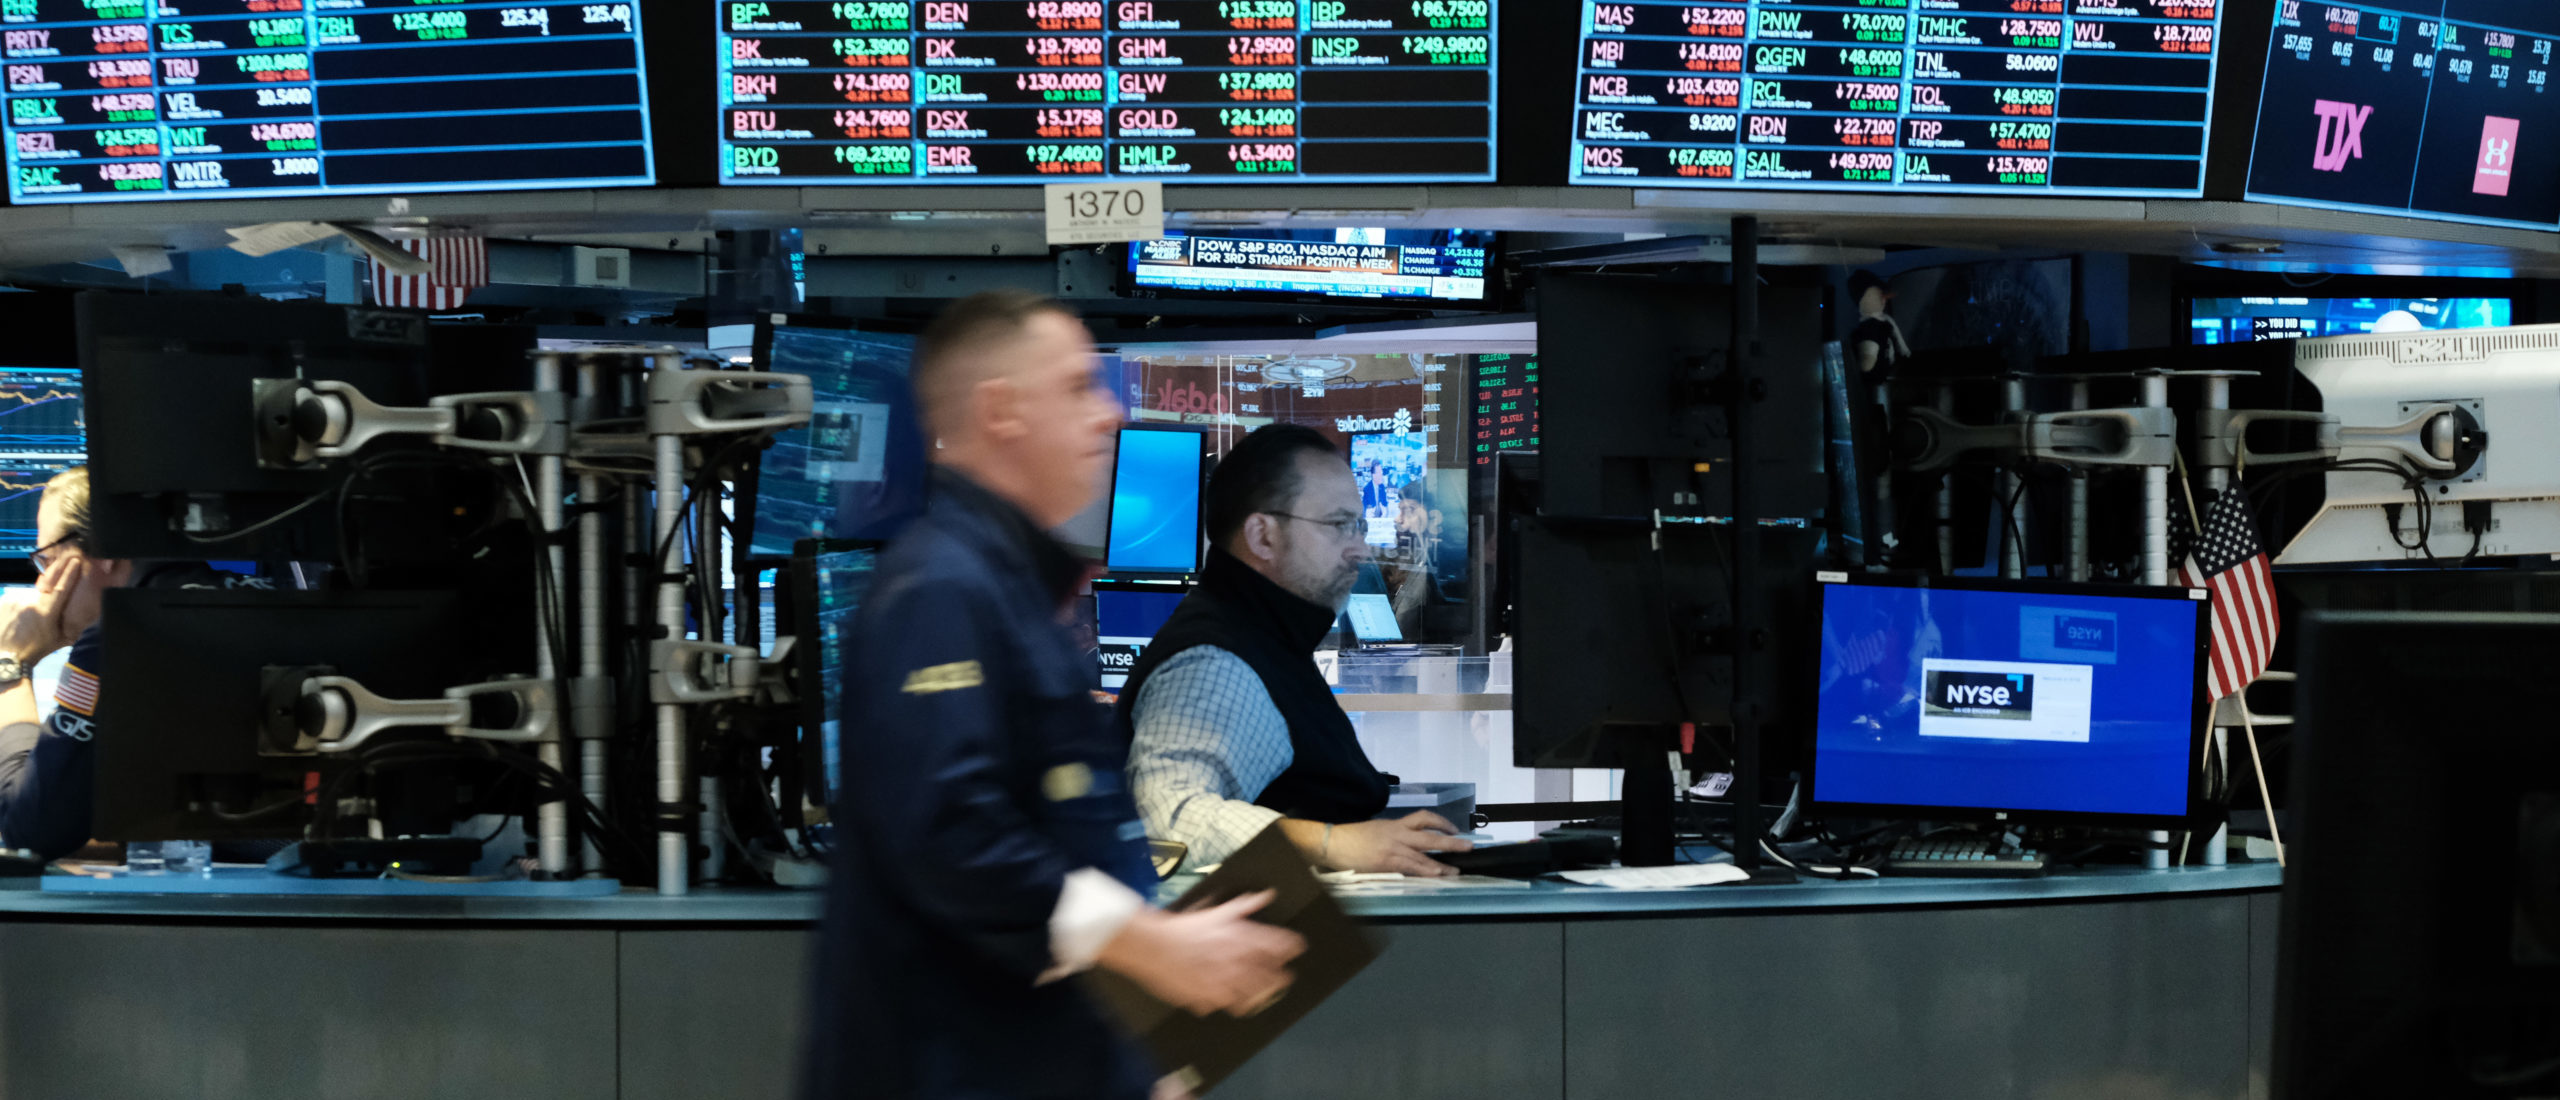 Traders work on the floor of the New York Stock Exchange (NYSE) on March 28, 2022 in New York City. (Photo by Spencer Platt/Getty Images)